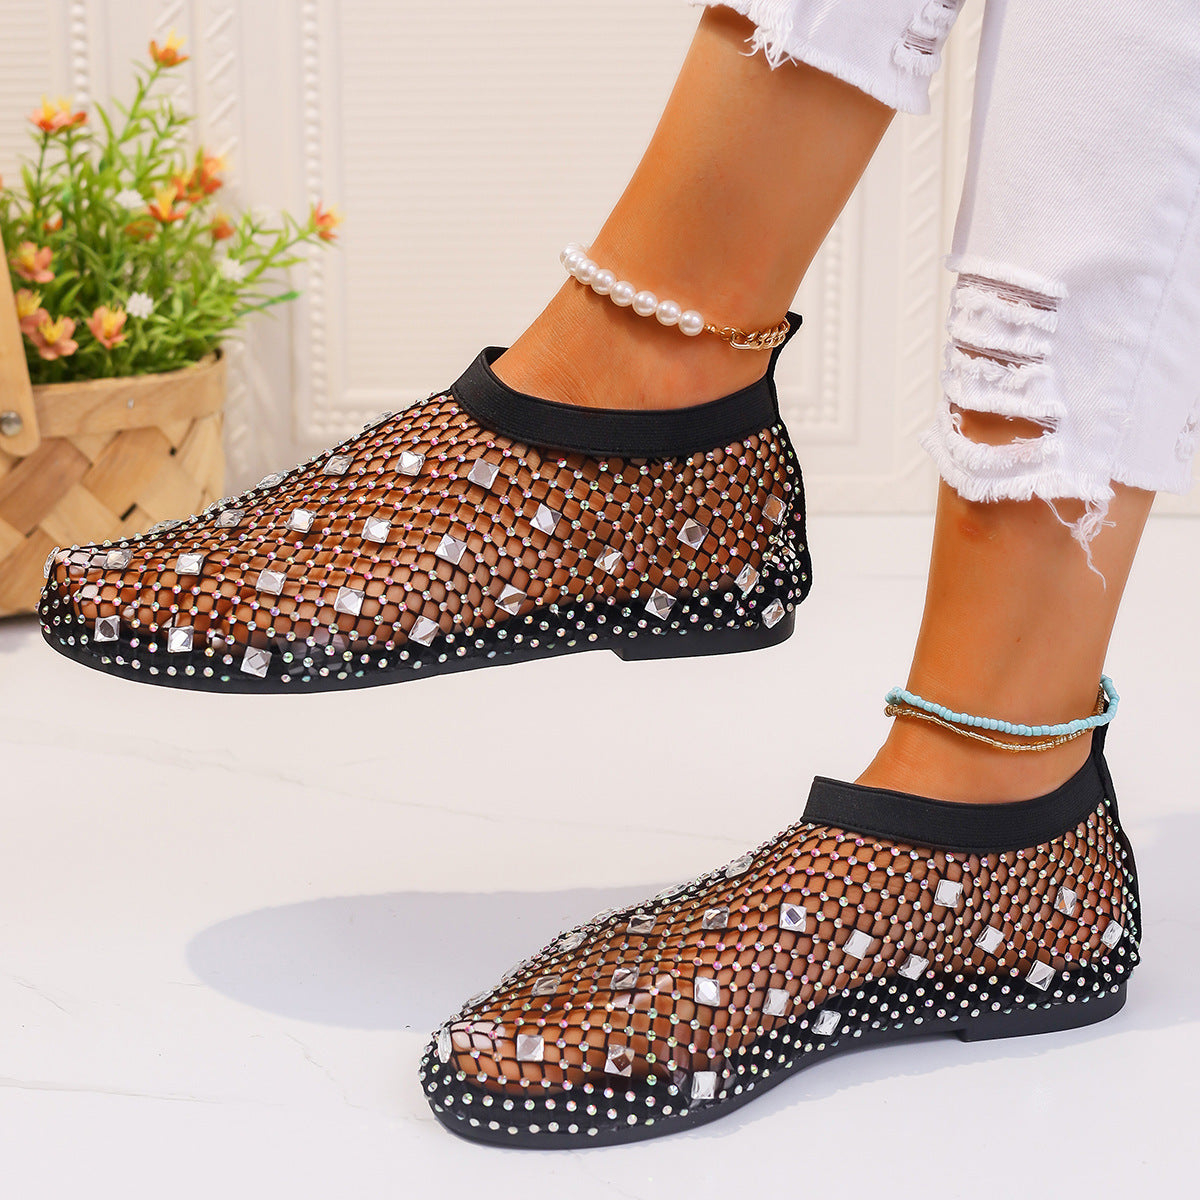 Round Toe Beach Shoes for Women: Fashionable Mesh Flat Sandals